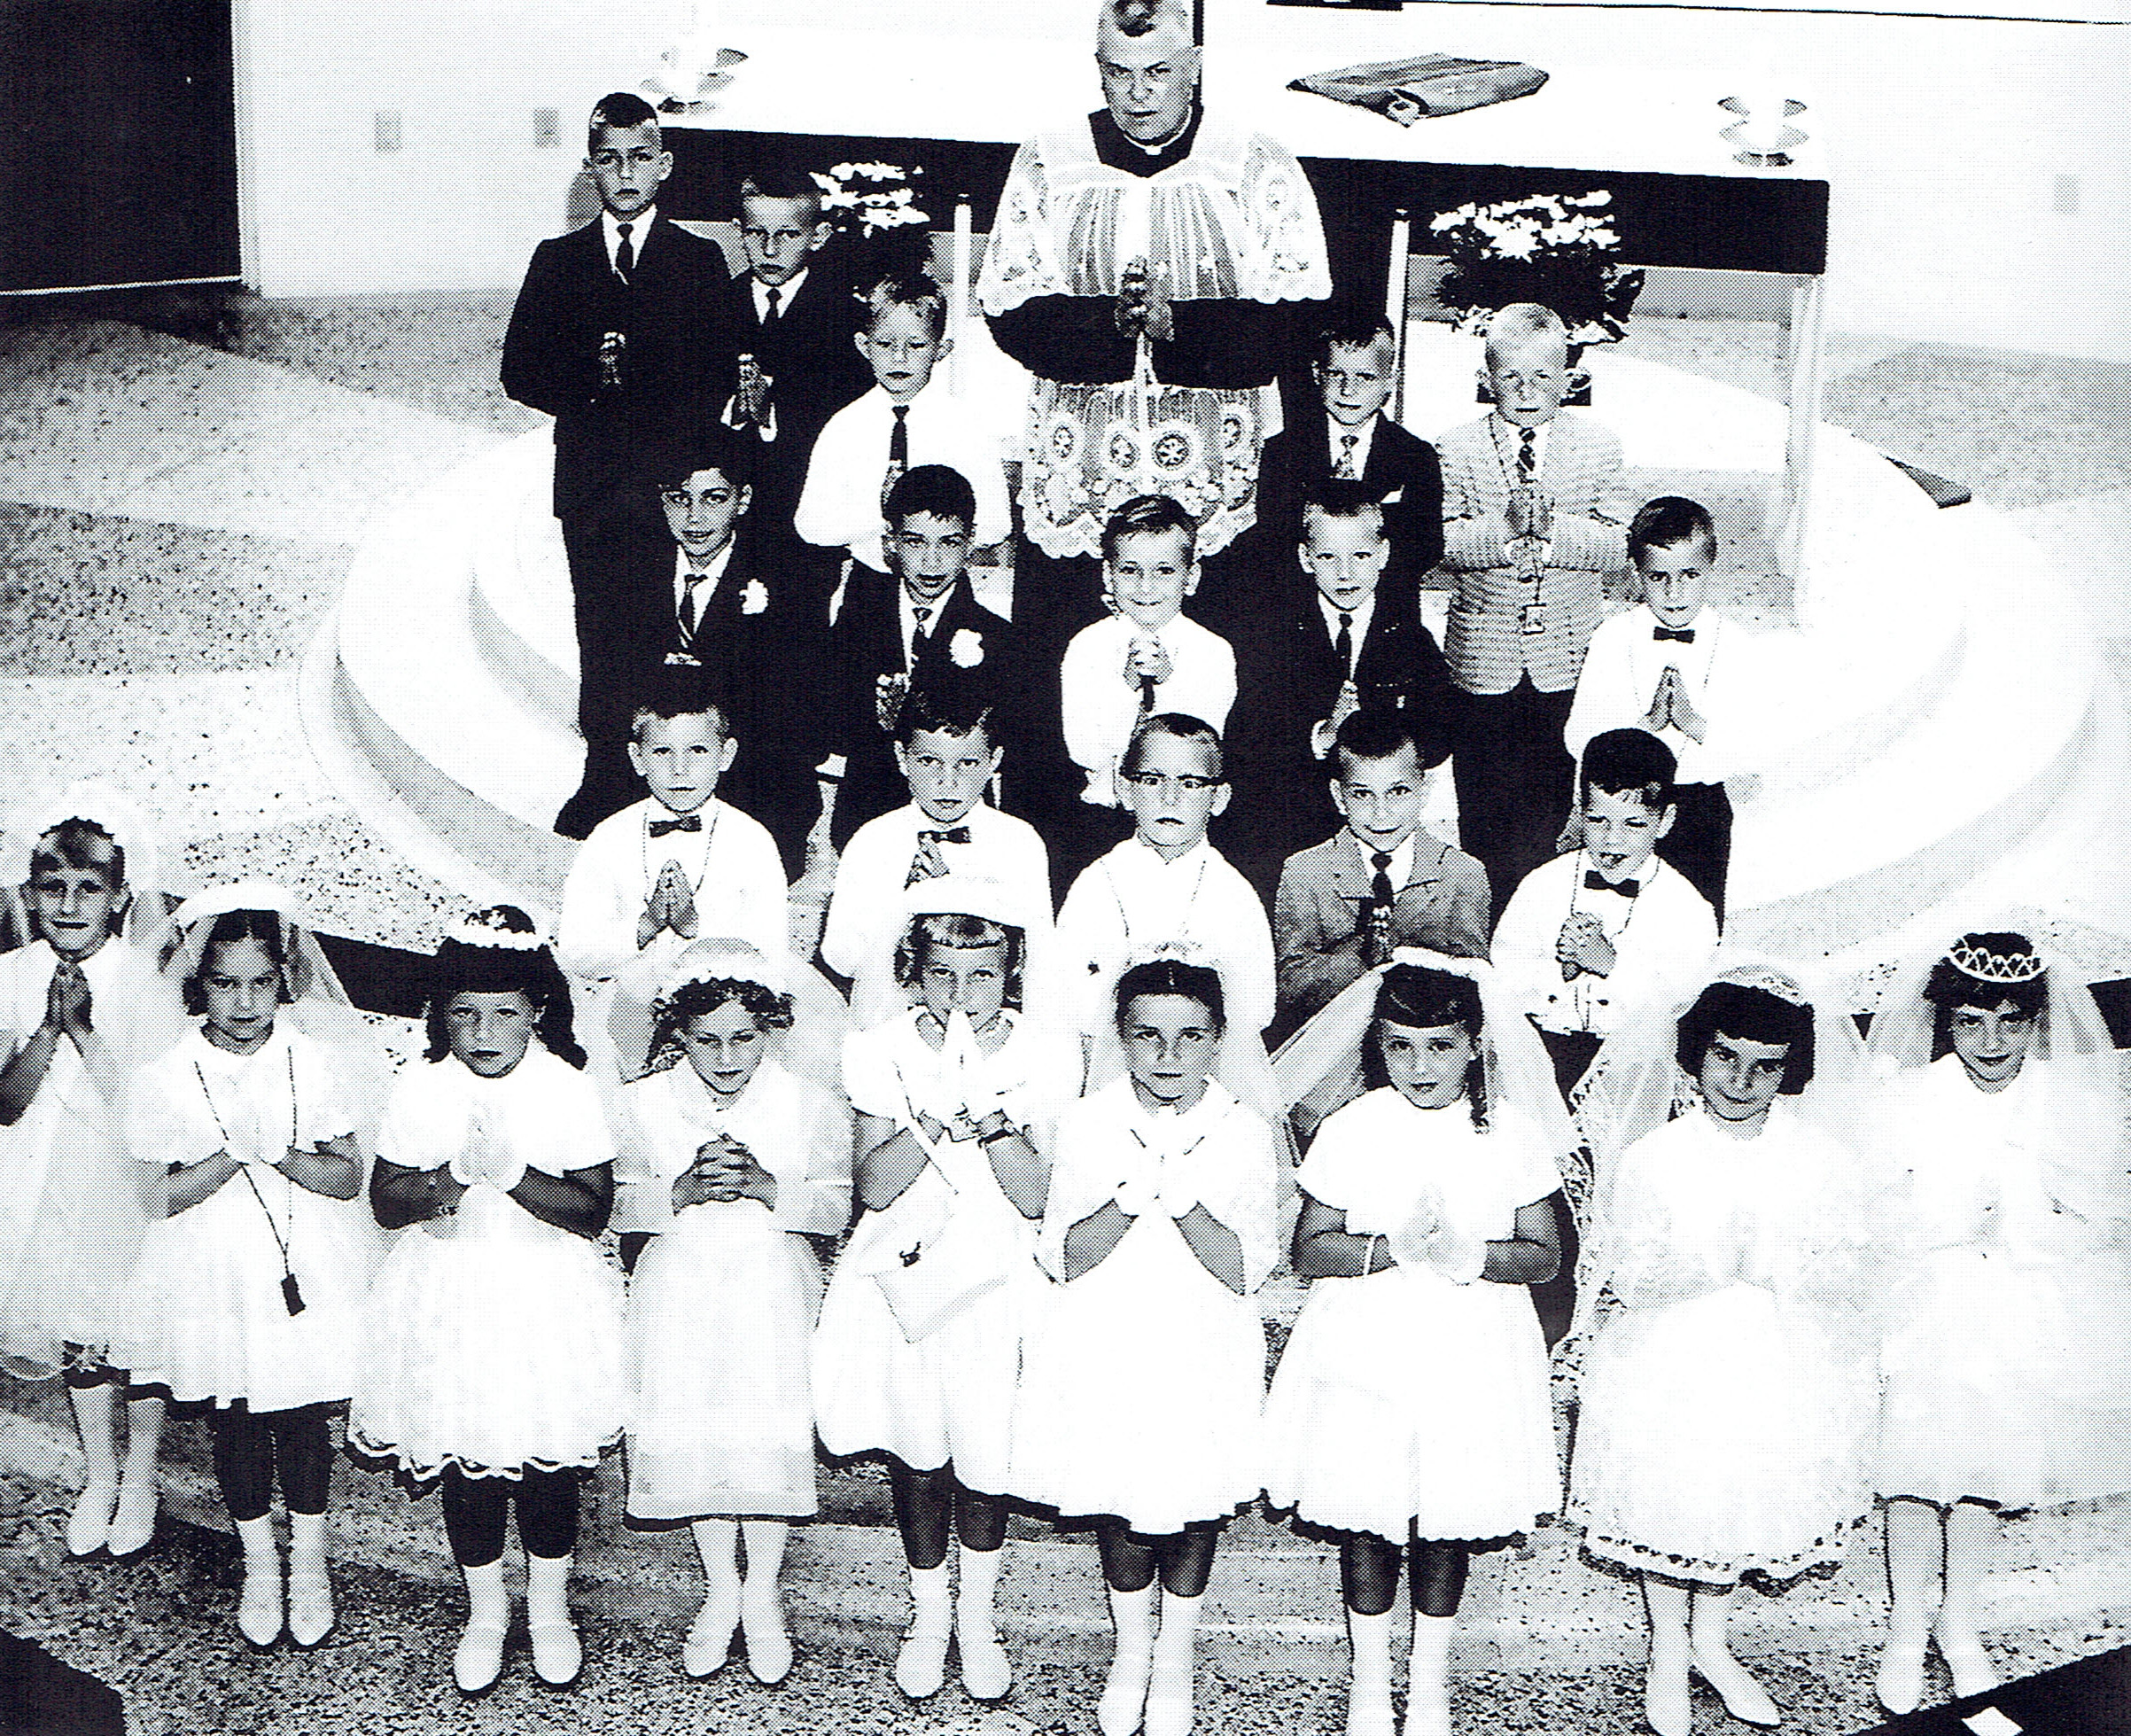 First Communion in the Old church